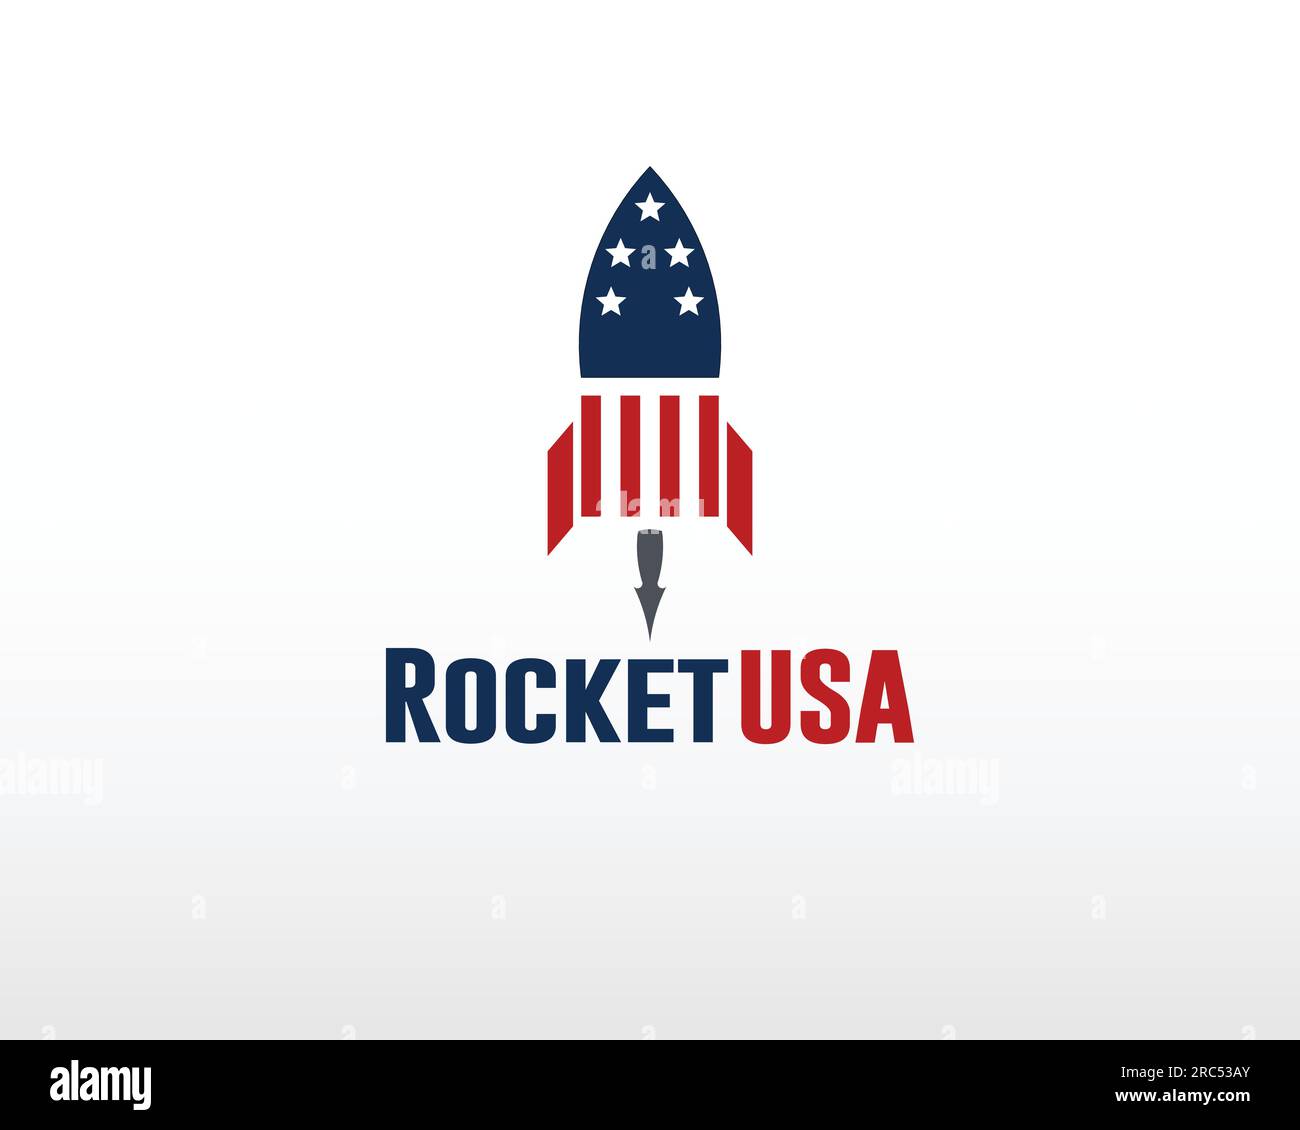 Rocket Launch: Dynamic logo in American colors symbolizing progress and ambition Stock Vector